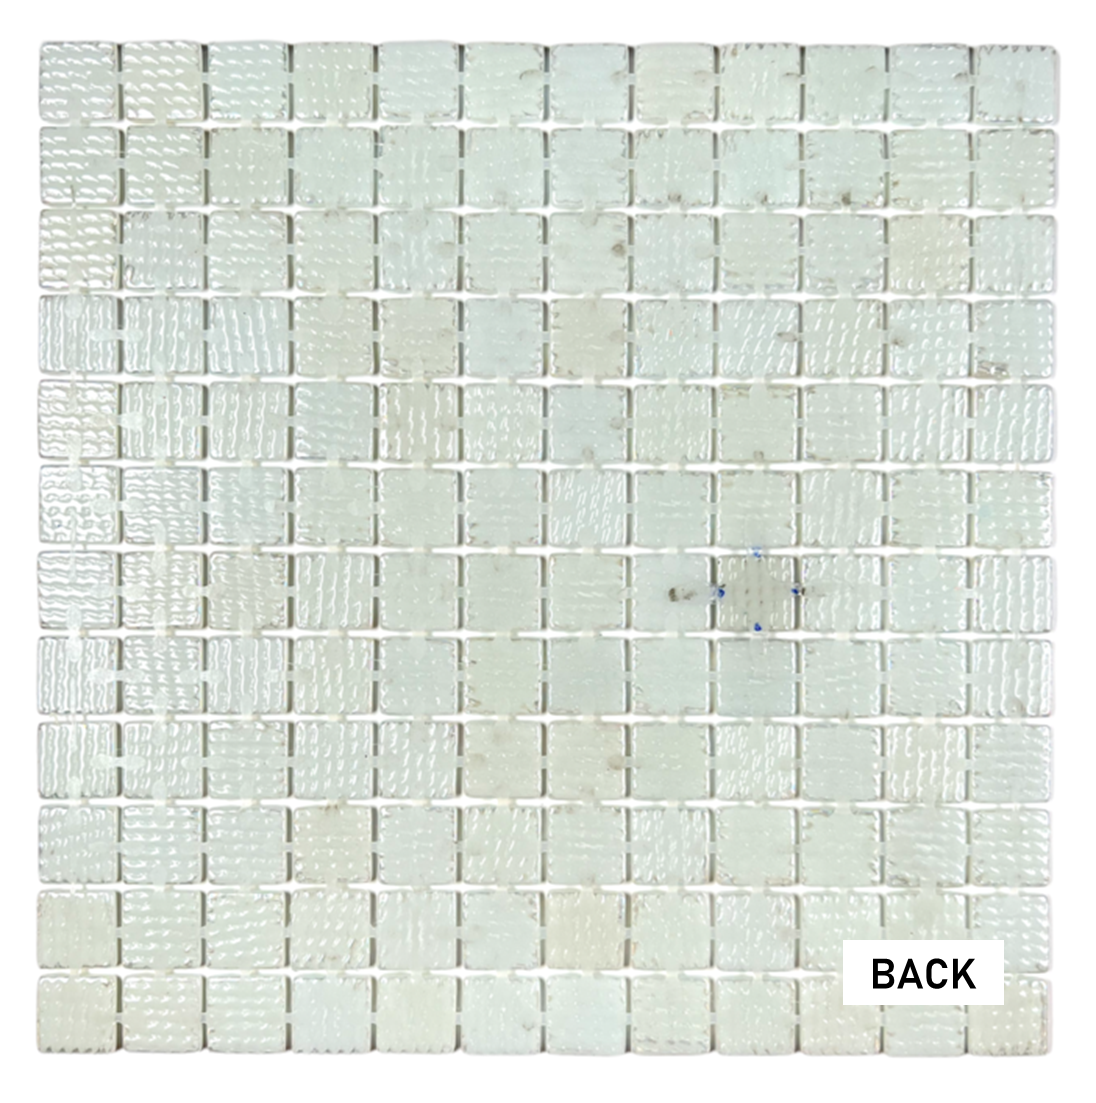 Tenedos White 1x1 Square Iridescent Recycled Glass Mosaic Floor and Wall Tile for Kitchen Backsplash, Swimming Pool Tile, Bathroom Wall, Accent Wall